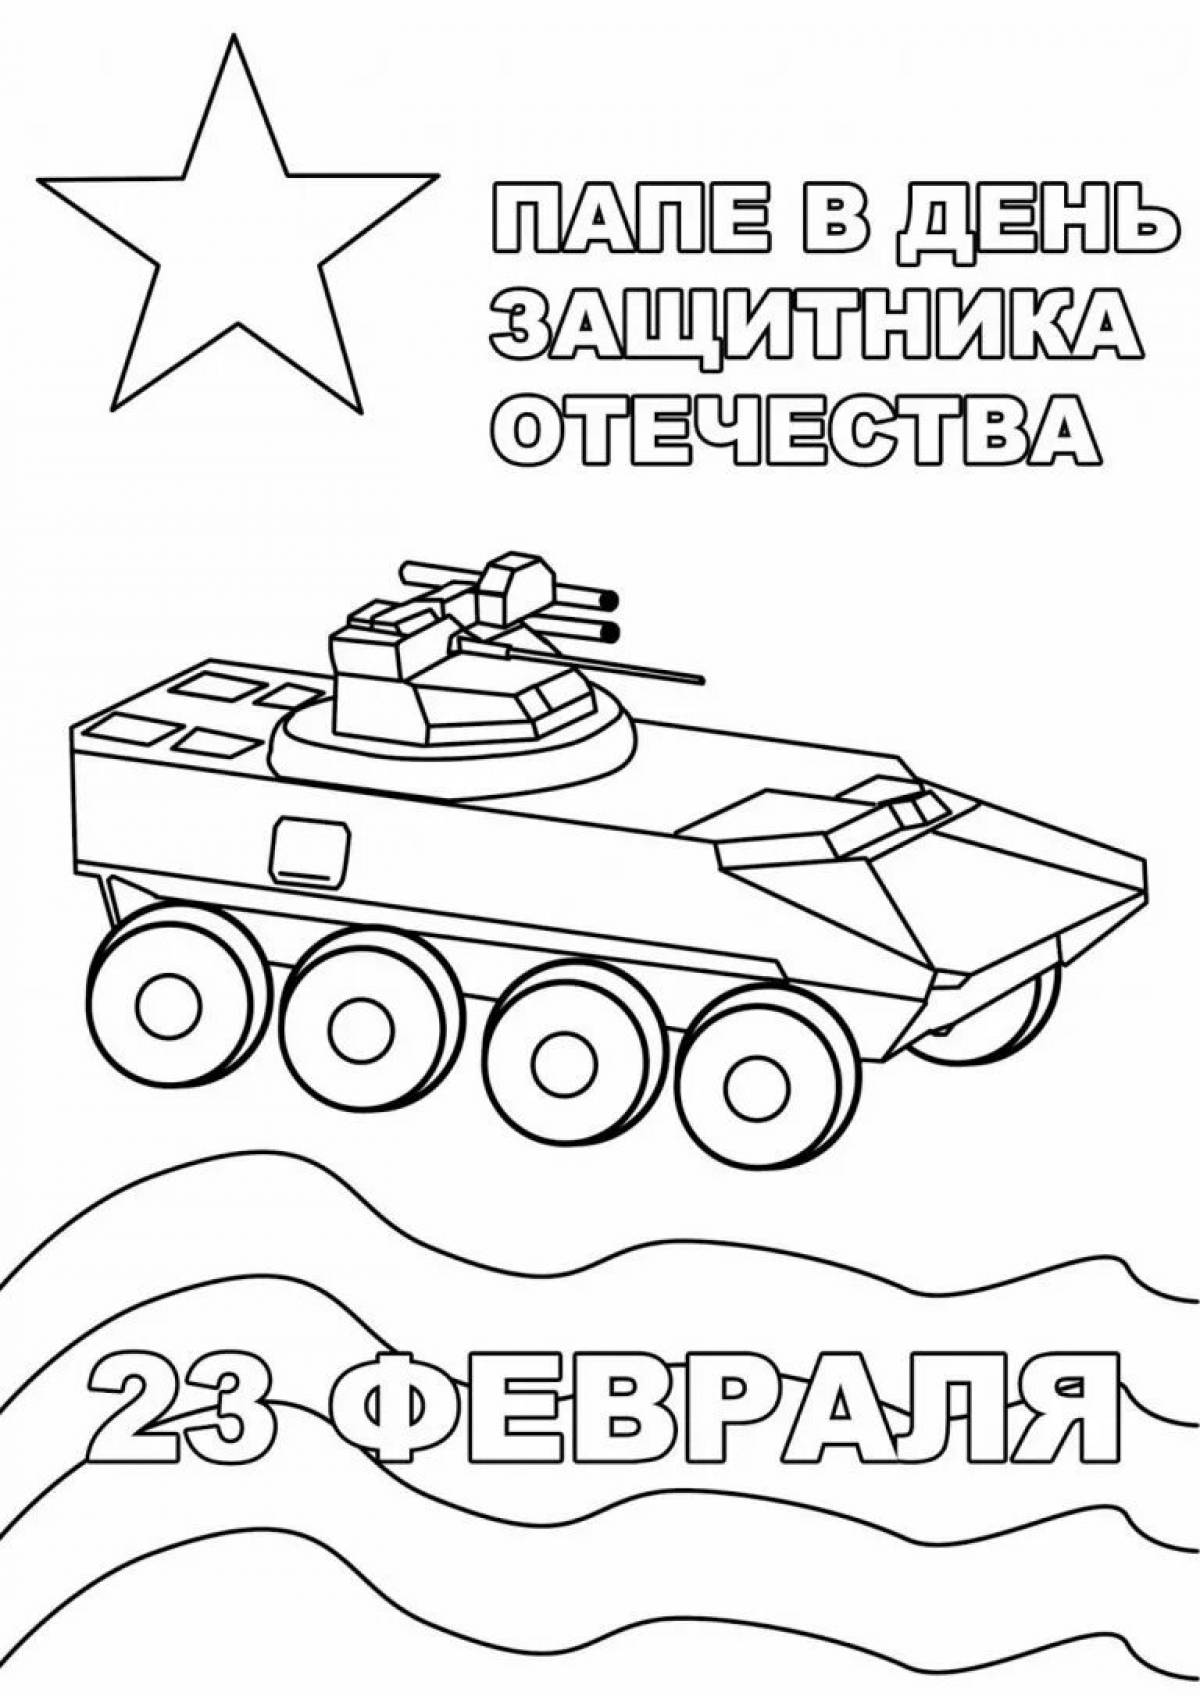 For preschoolers on Defender of the Fatherland Day #11